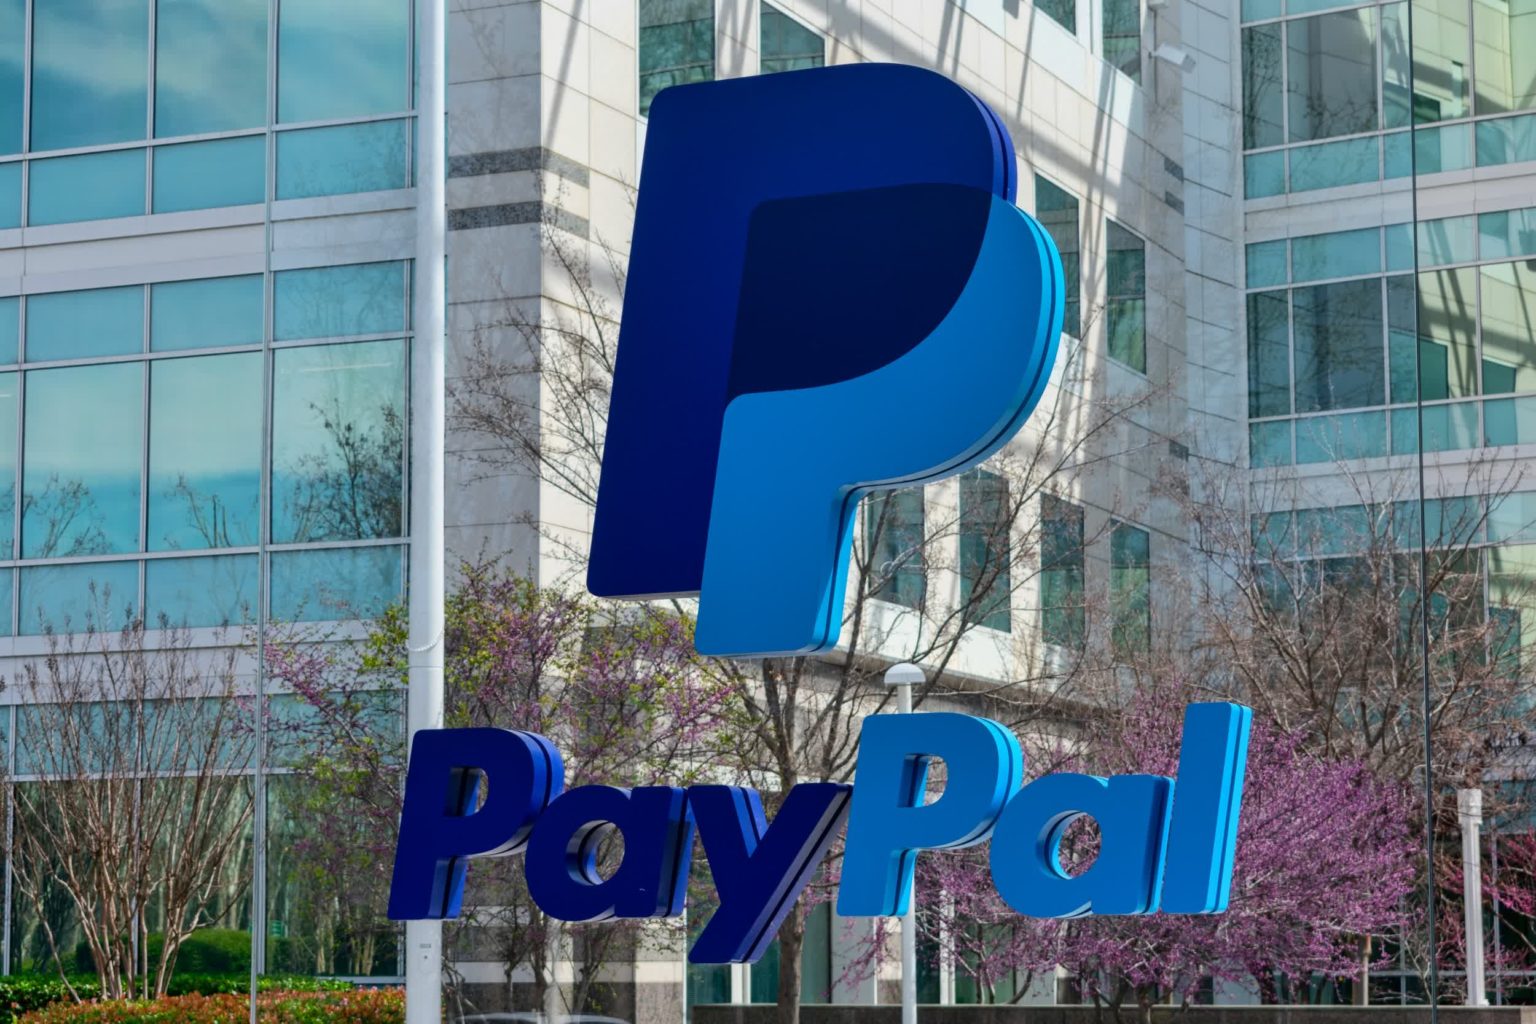 PayPal announces major workforce reduction, cutting 2,500 jobs globally